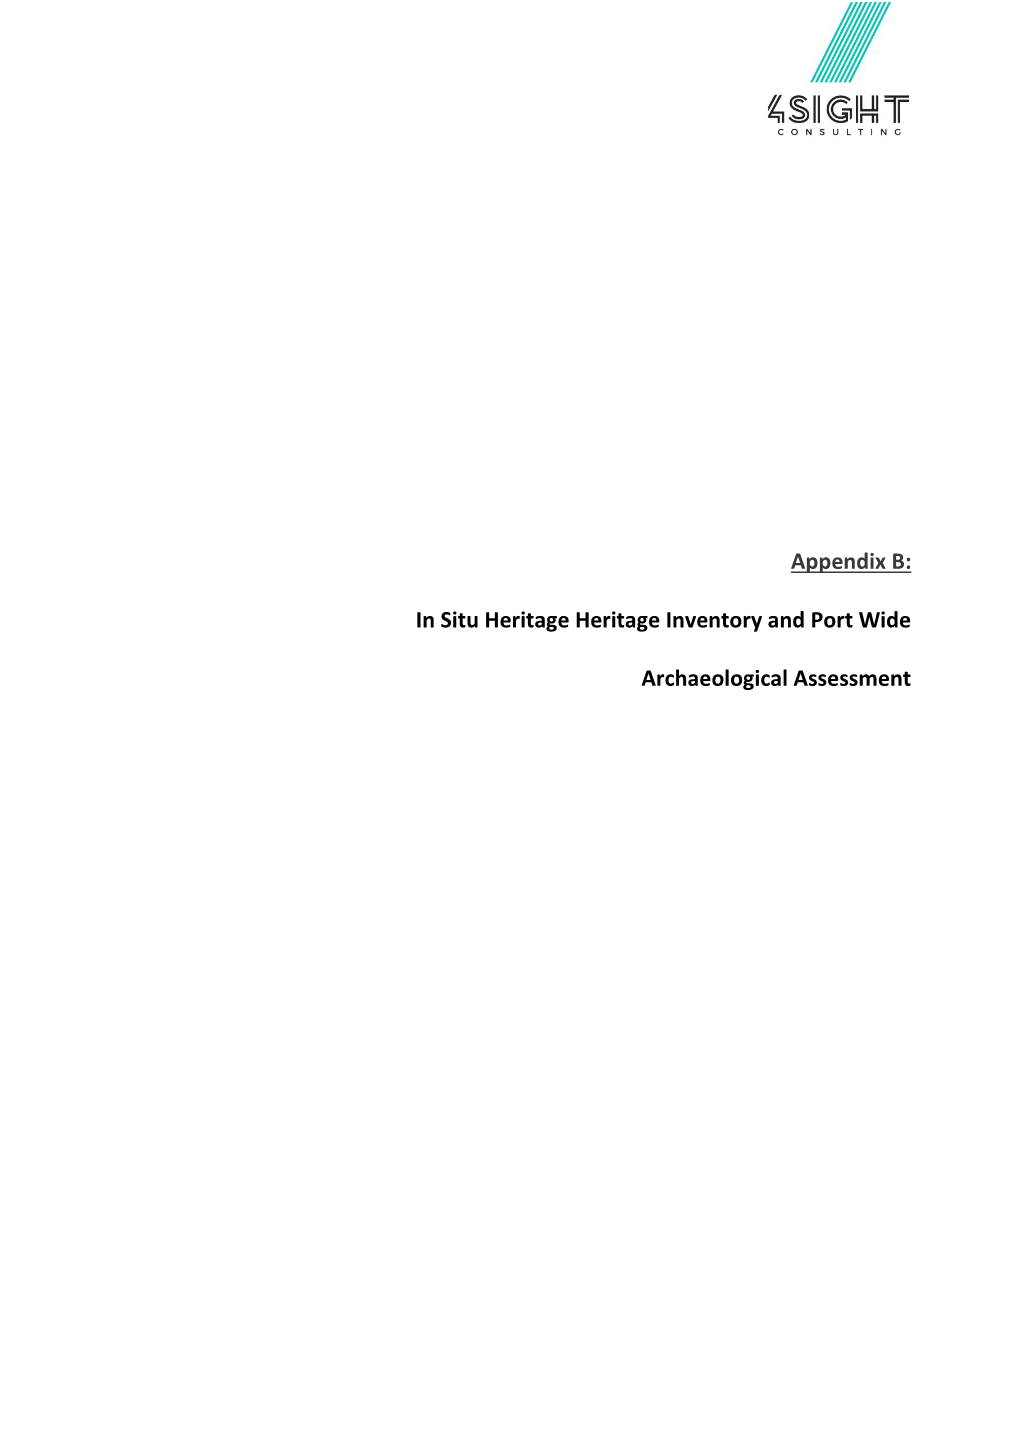 Eastland Port Ltd. Heritage Inventory and Whole of Port Archaeological Assessment